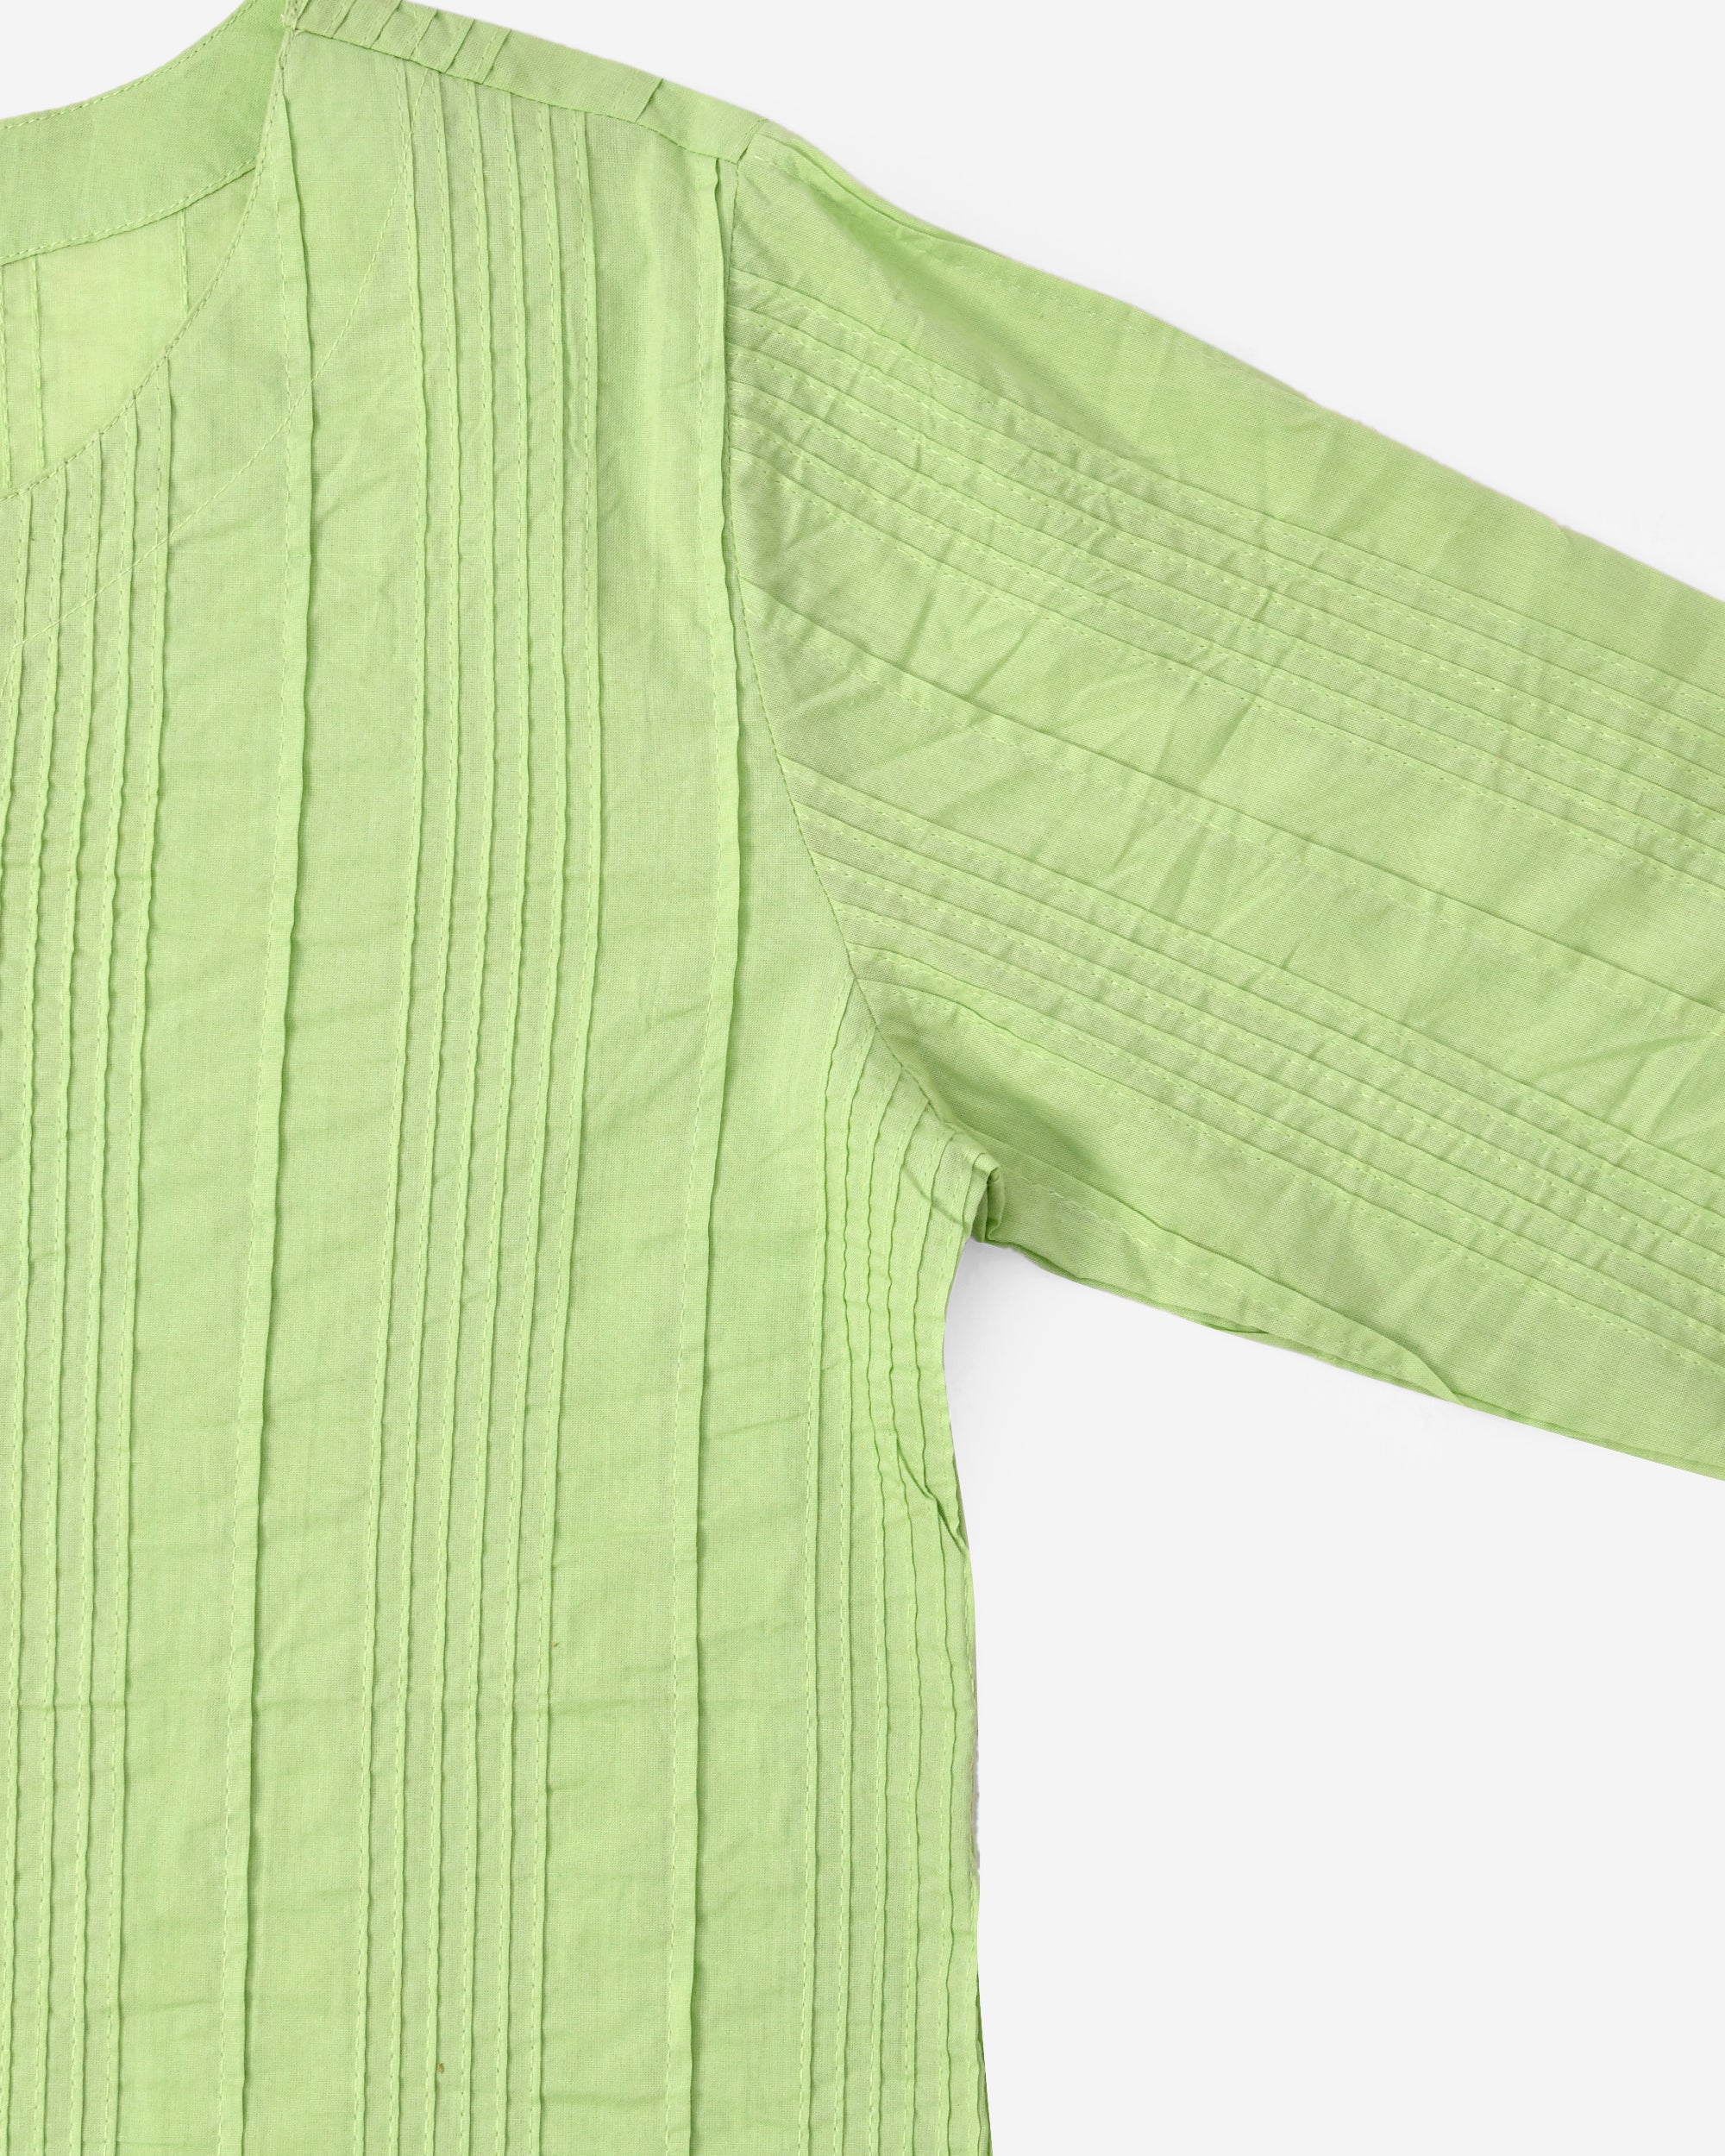 Lettuce Green Everyday Cotton Top